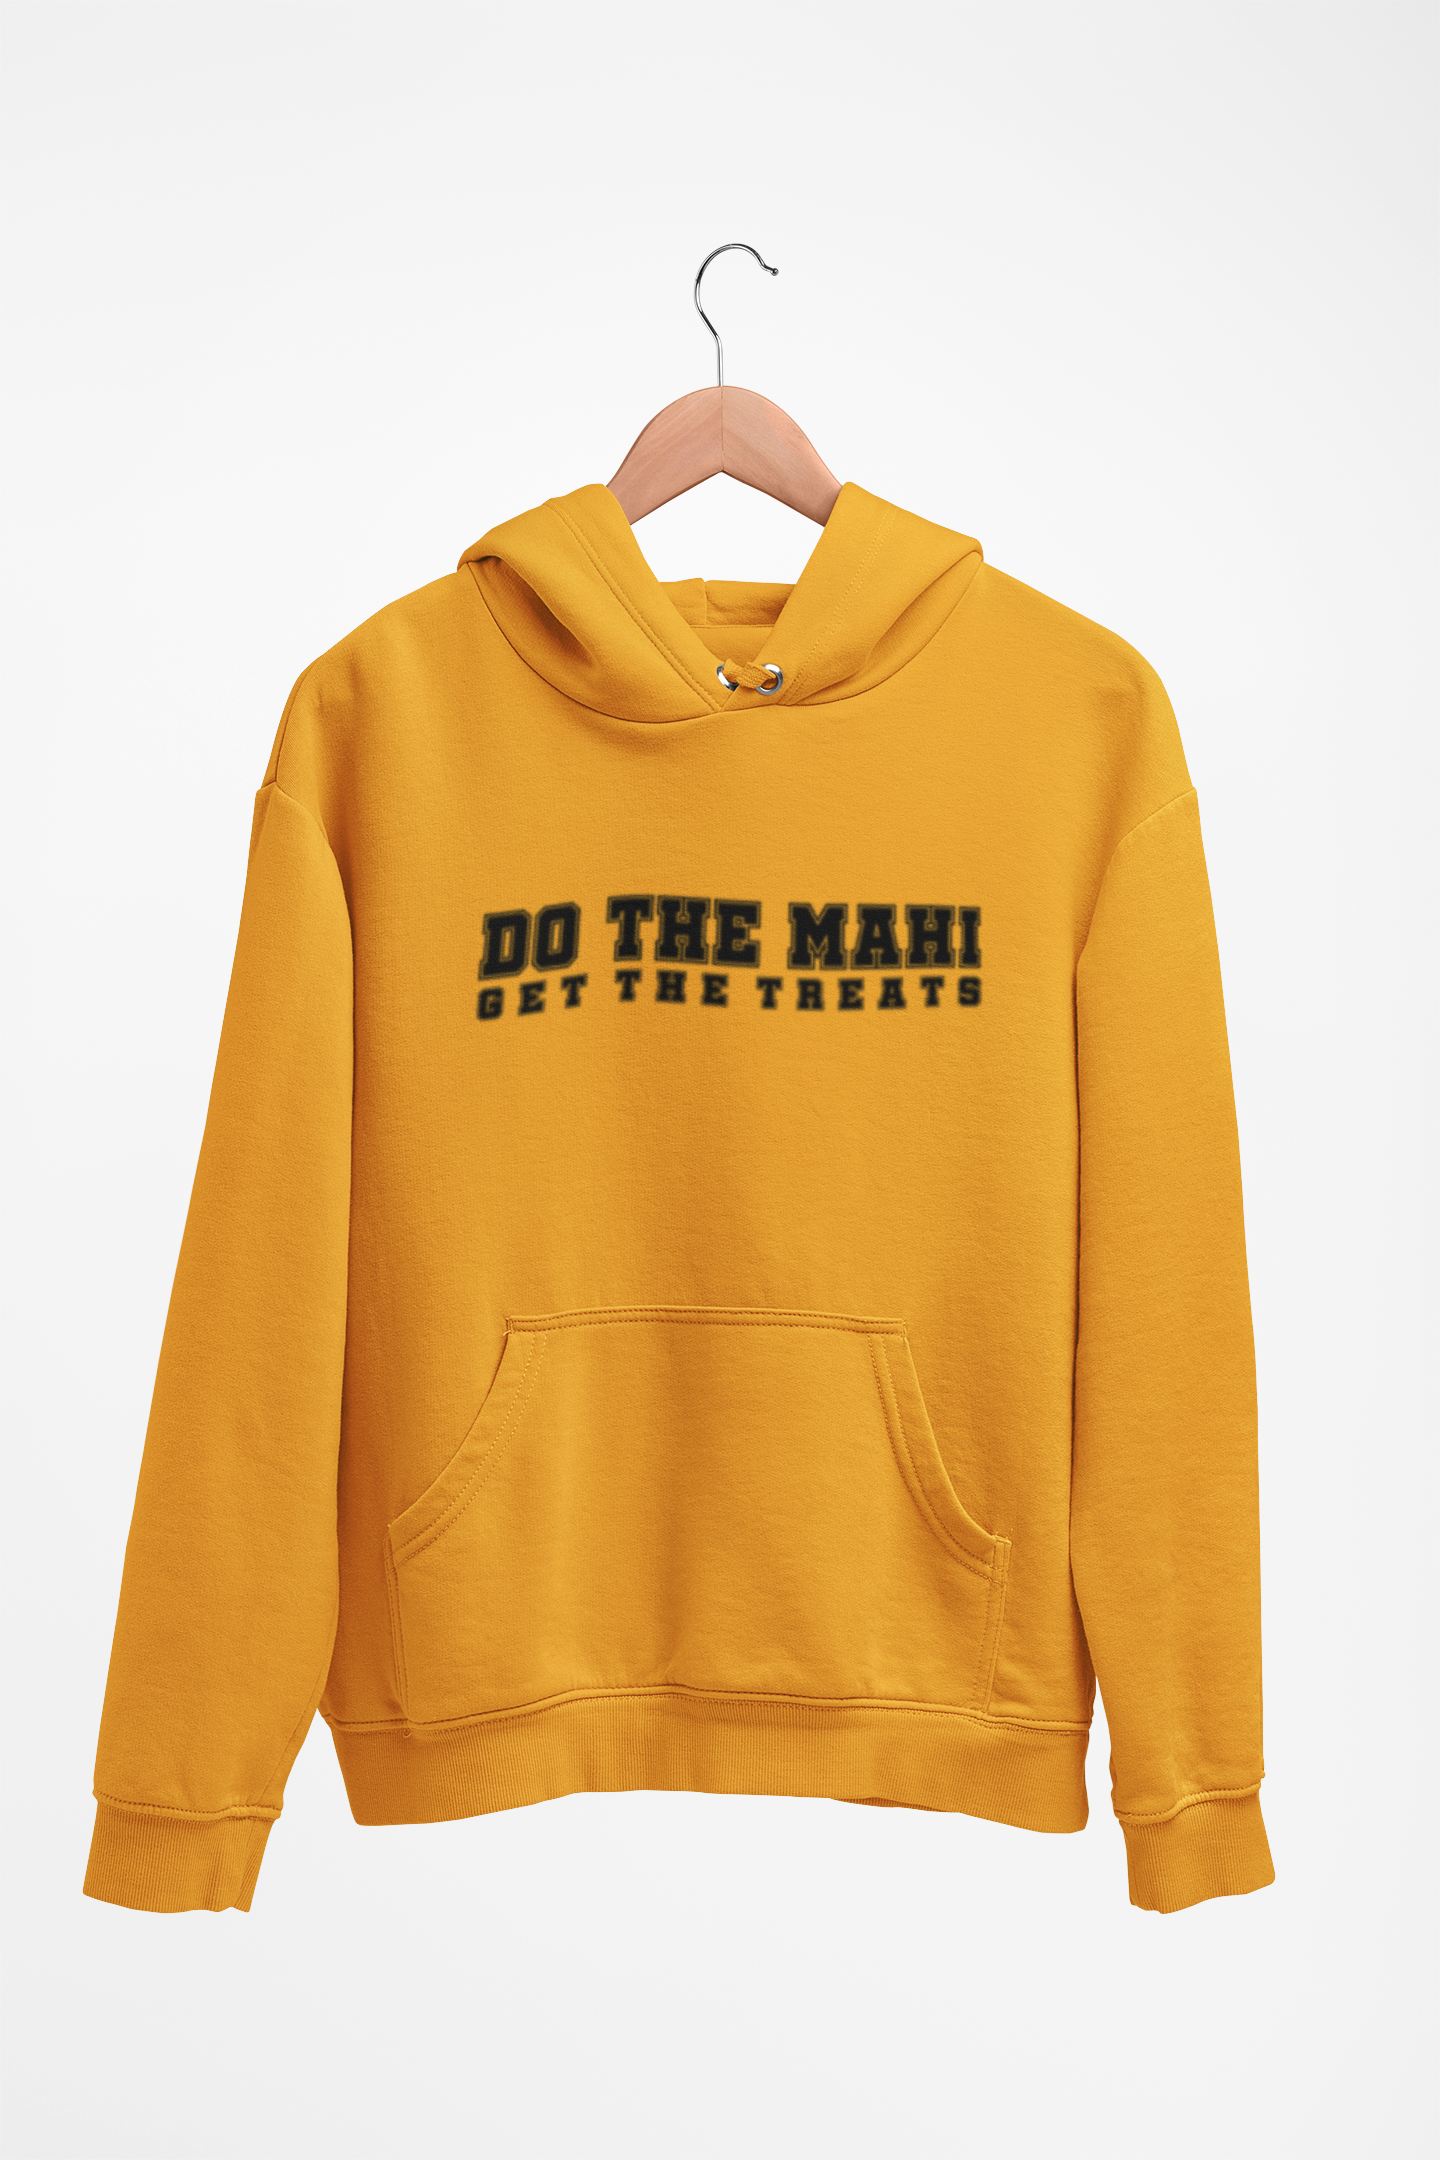 DTM, Get The Treats (black text) - Adult Hoodie